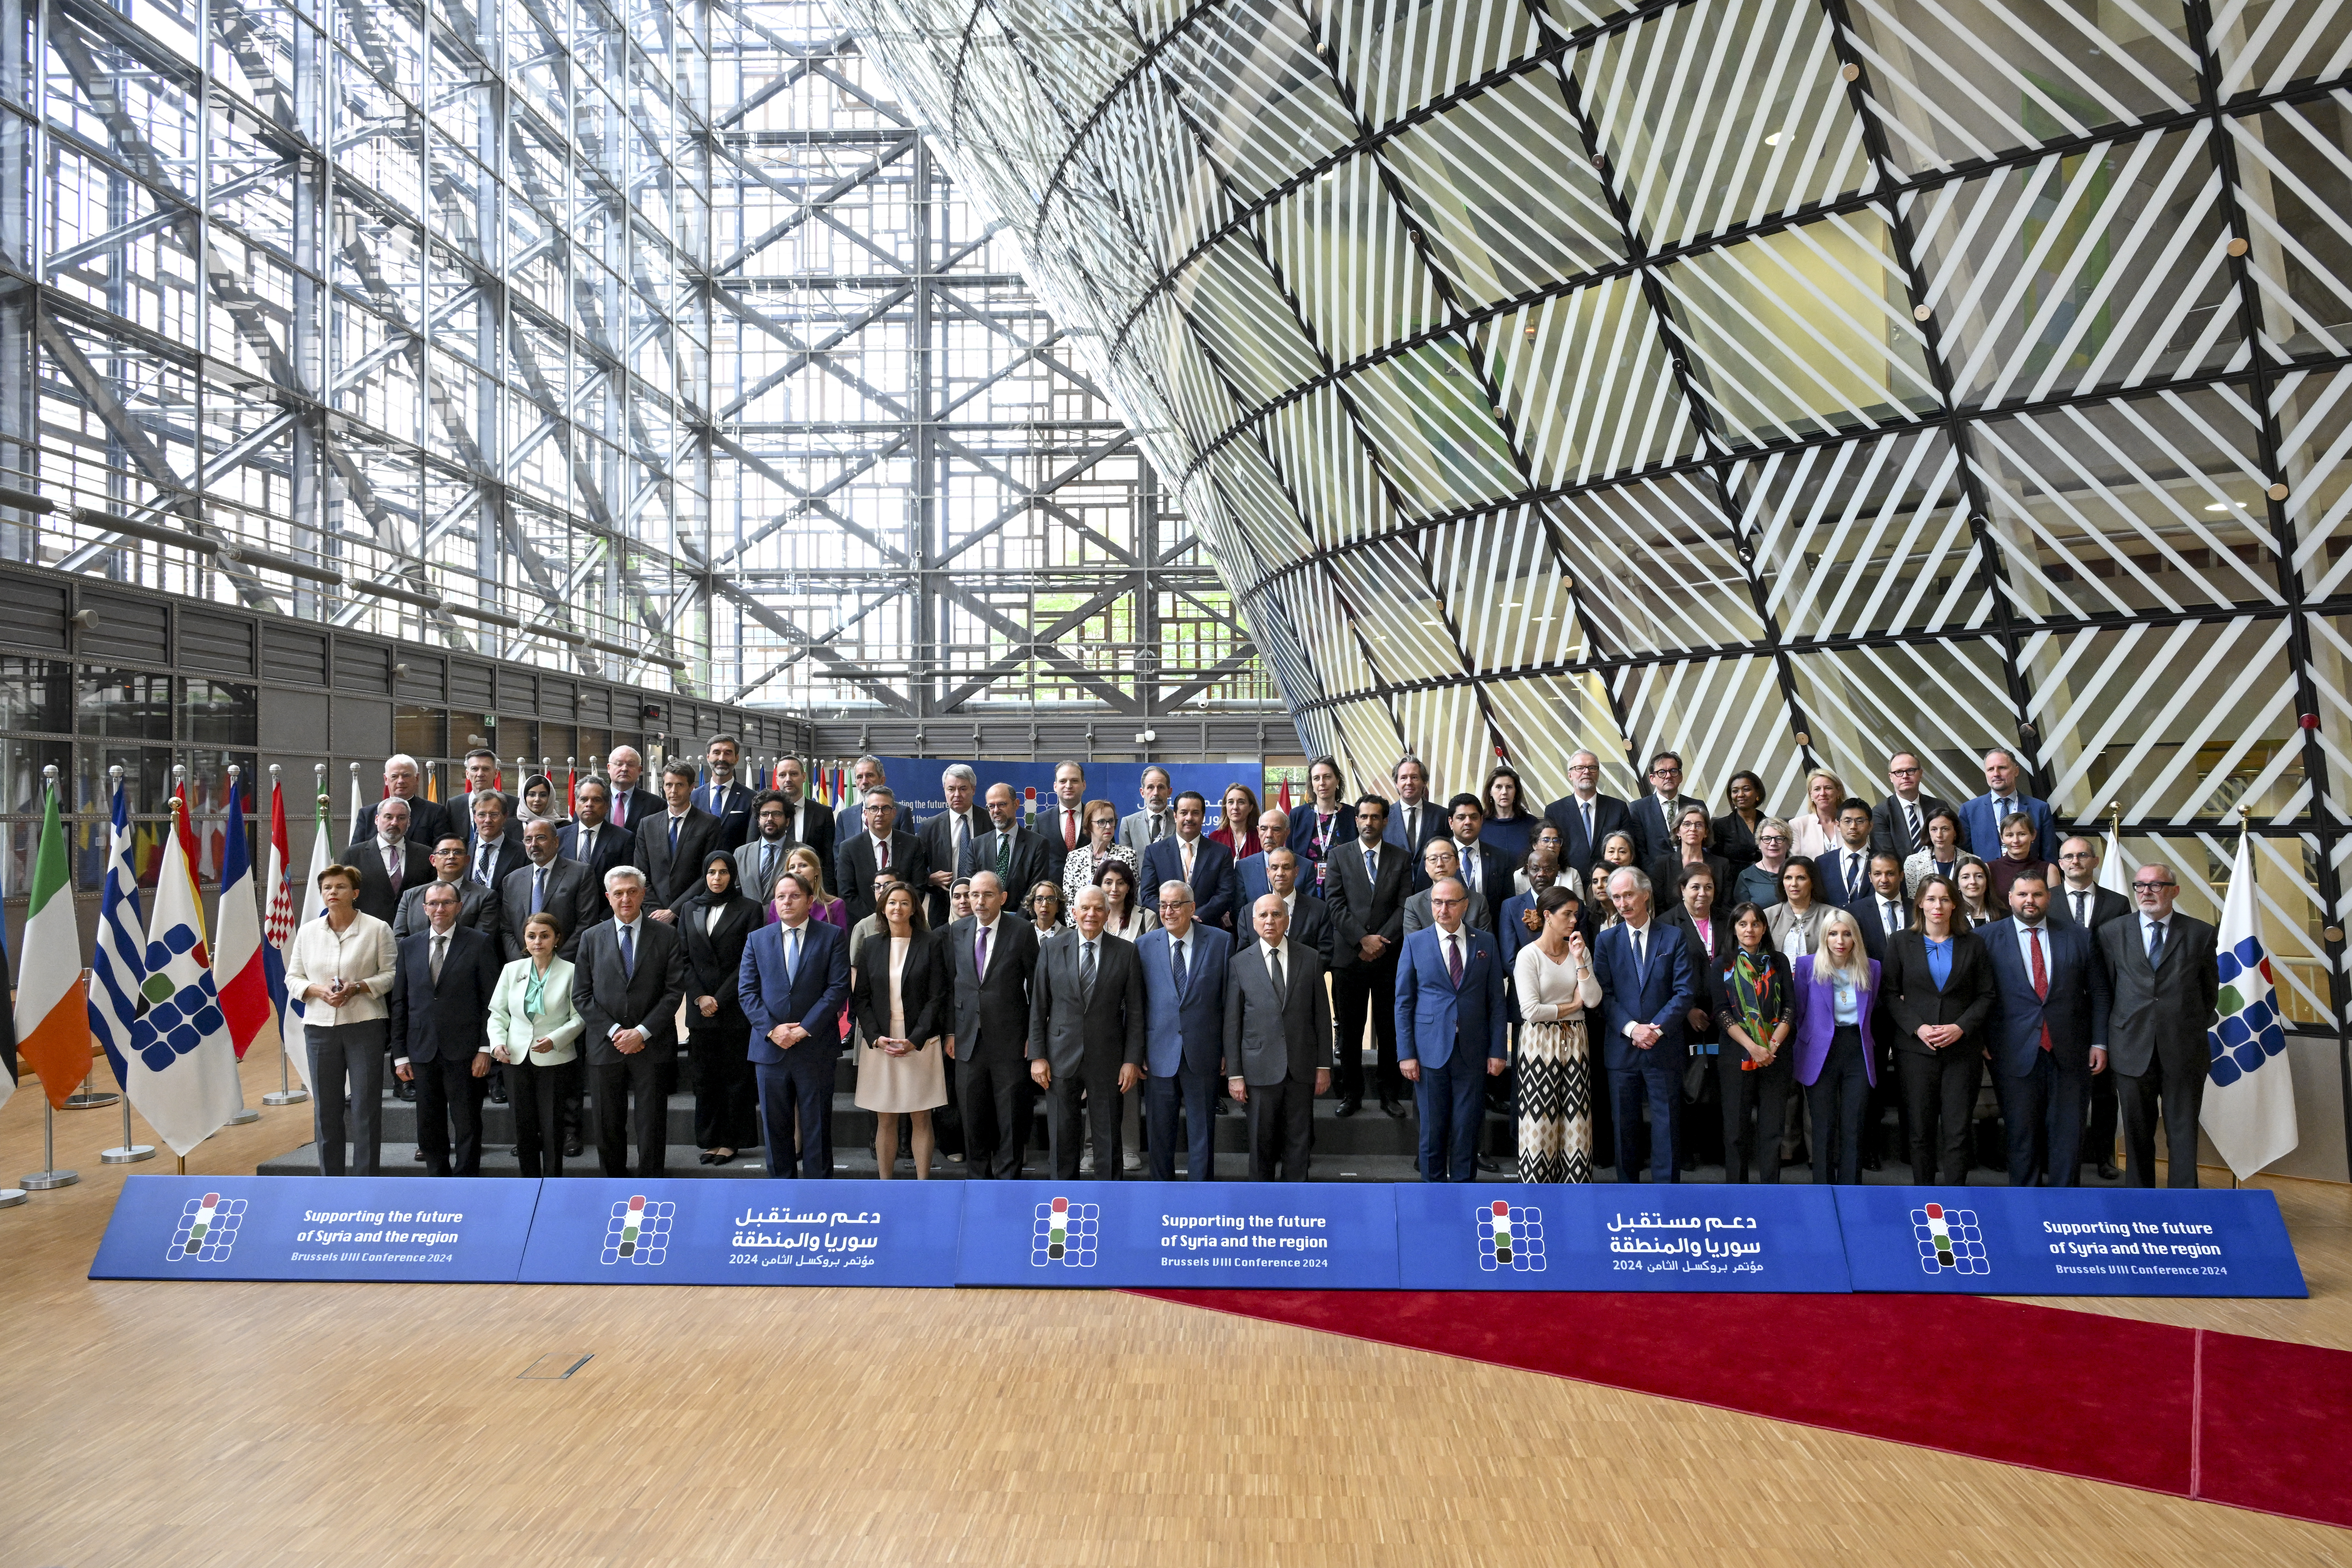 Family photo from the 2024 Brussels VIII Conference on 'Supporting the future of Syria and the region'. - mynd